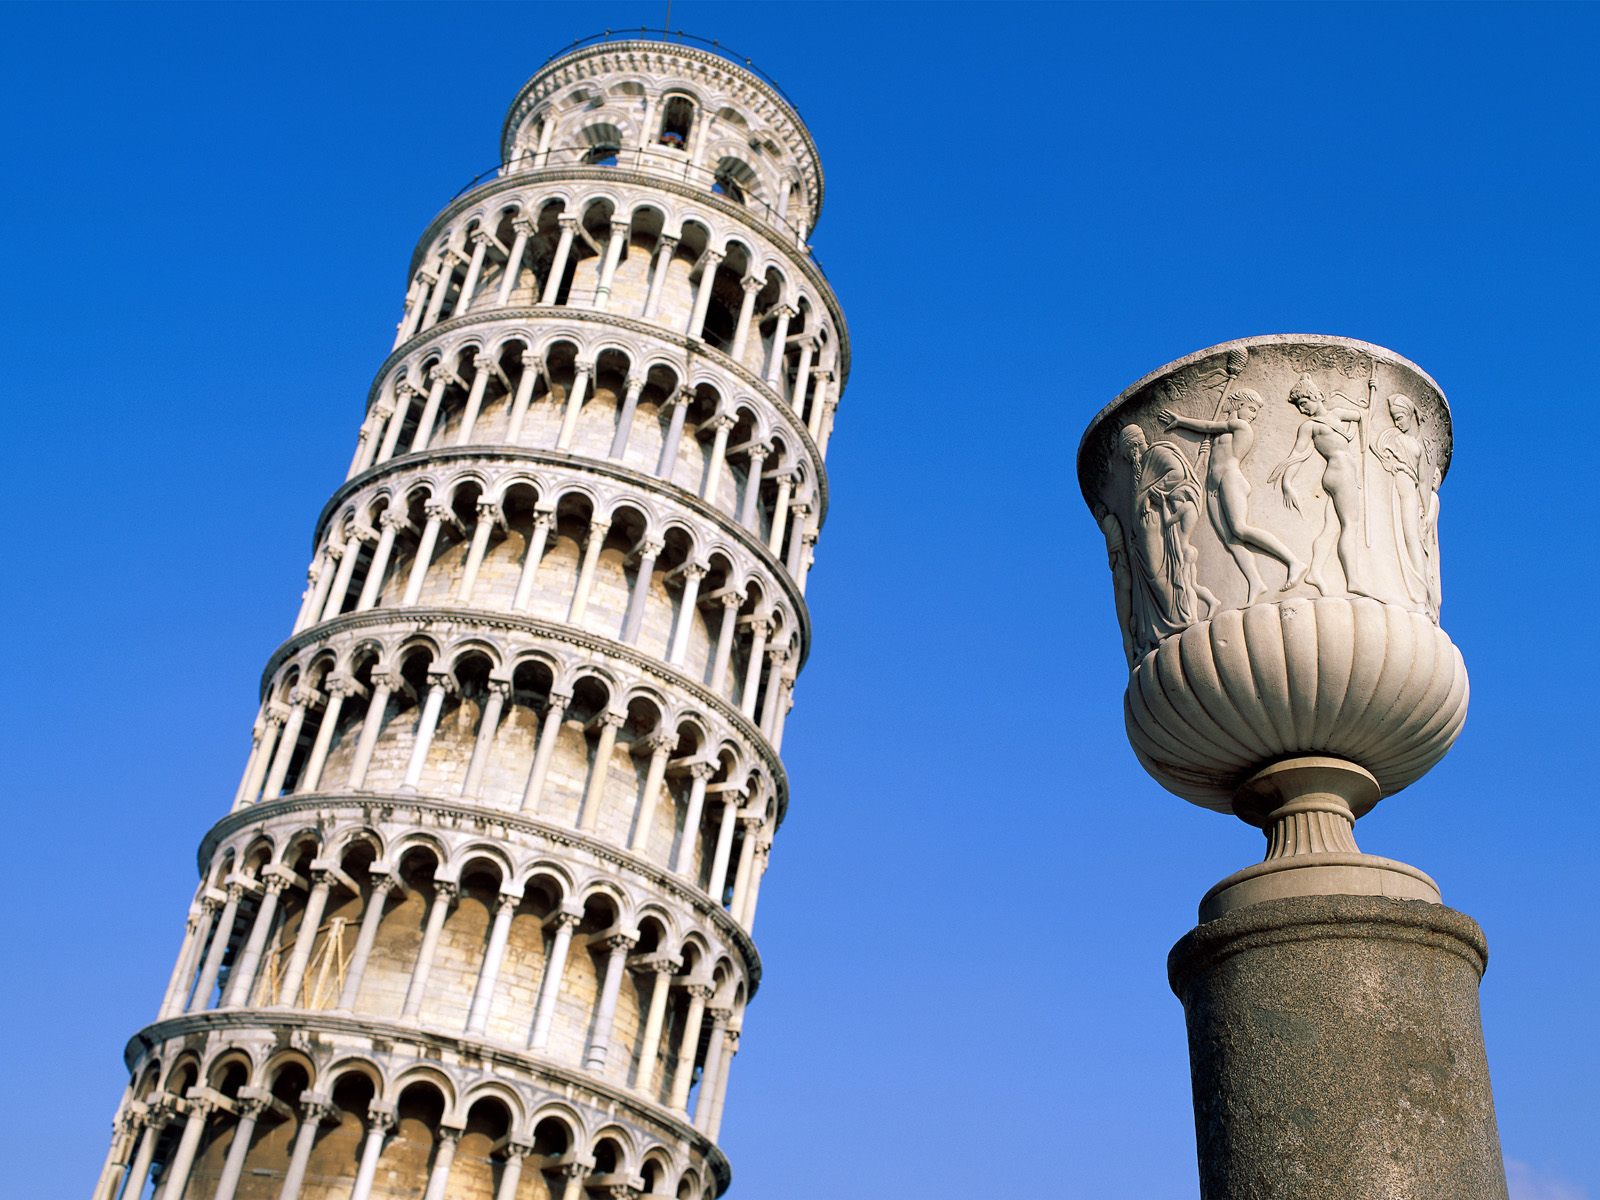 leaning tower of pisa deep dish pizza side angle